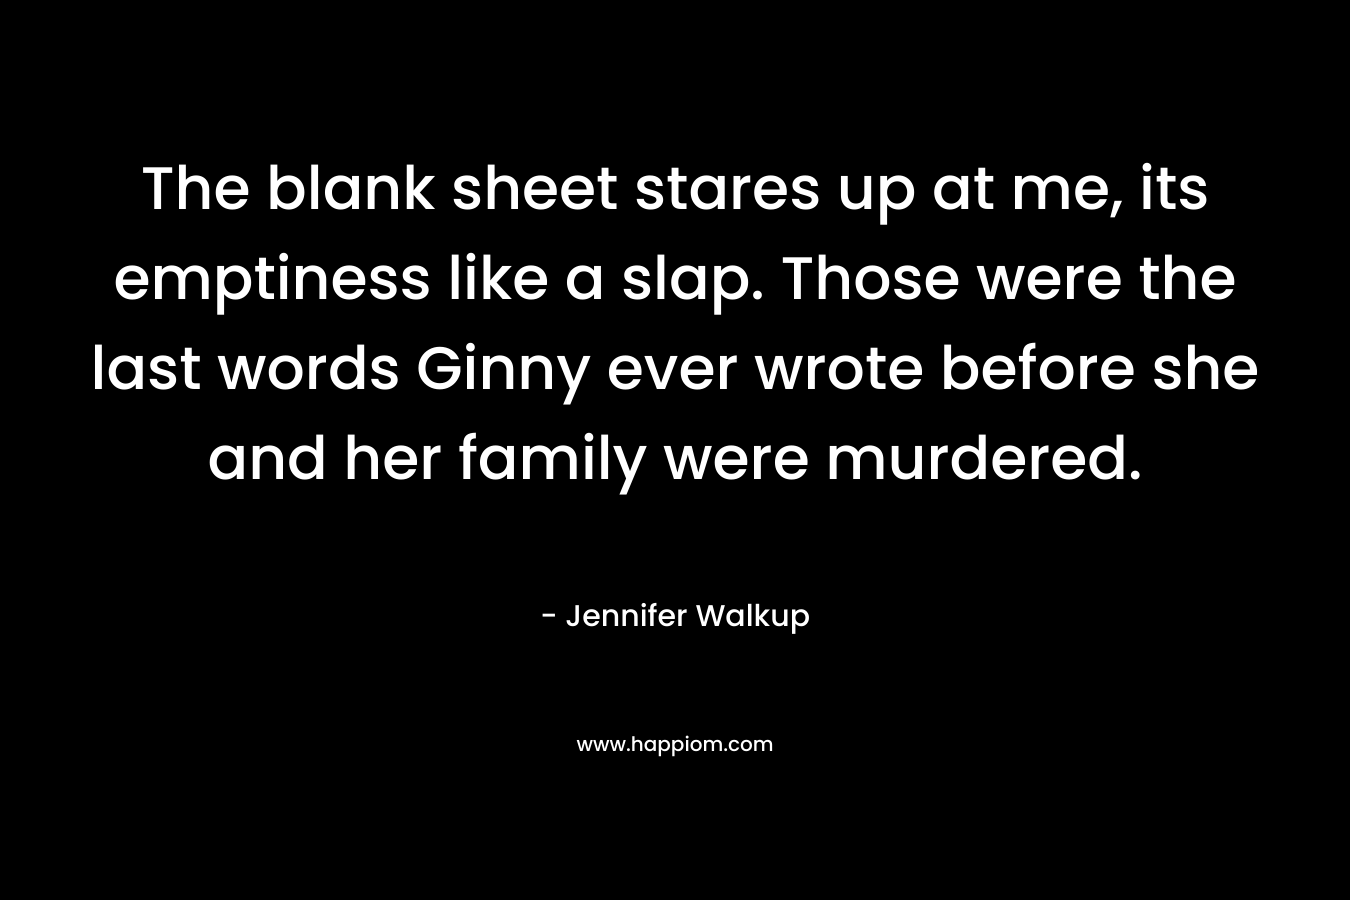 The blank sheet stares up at me, its emptiness like a slap. Those were the last words Ginny ever wrote before she and her family were murdered. – Jennifer Walkup